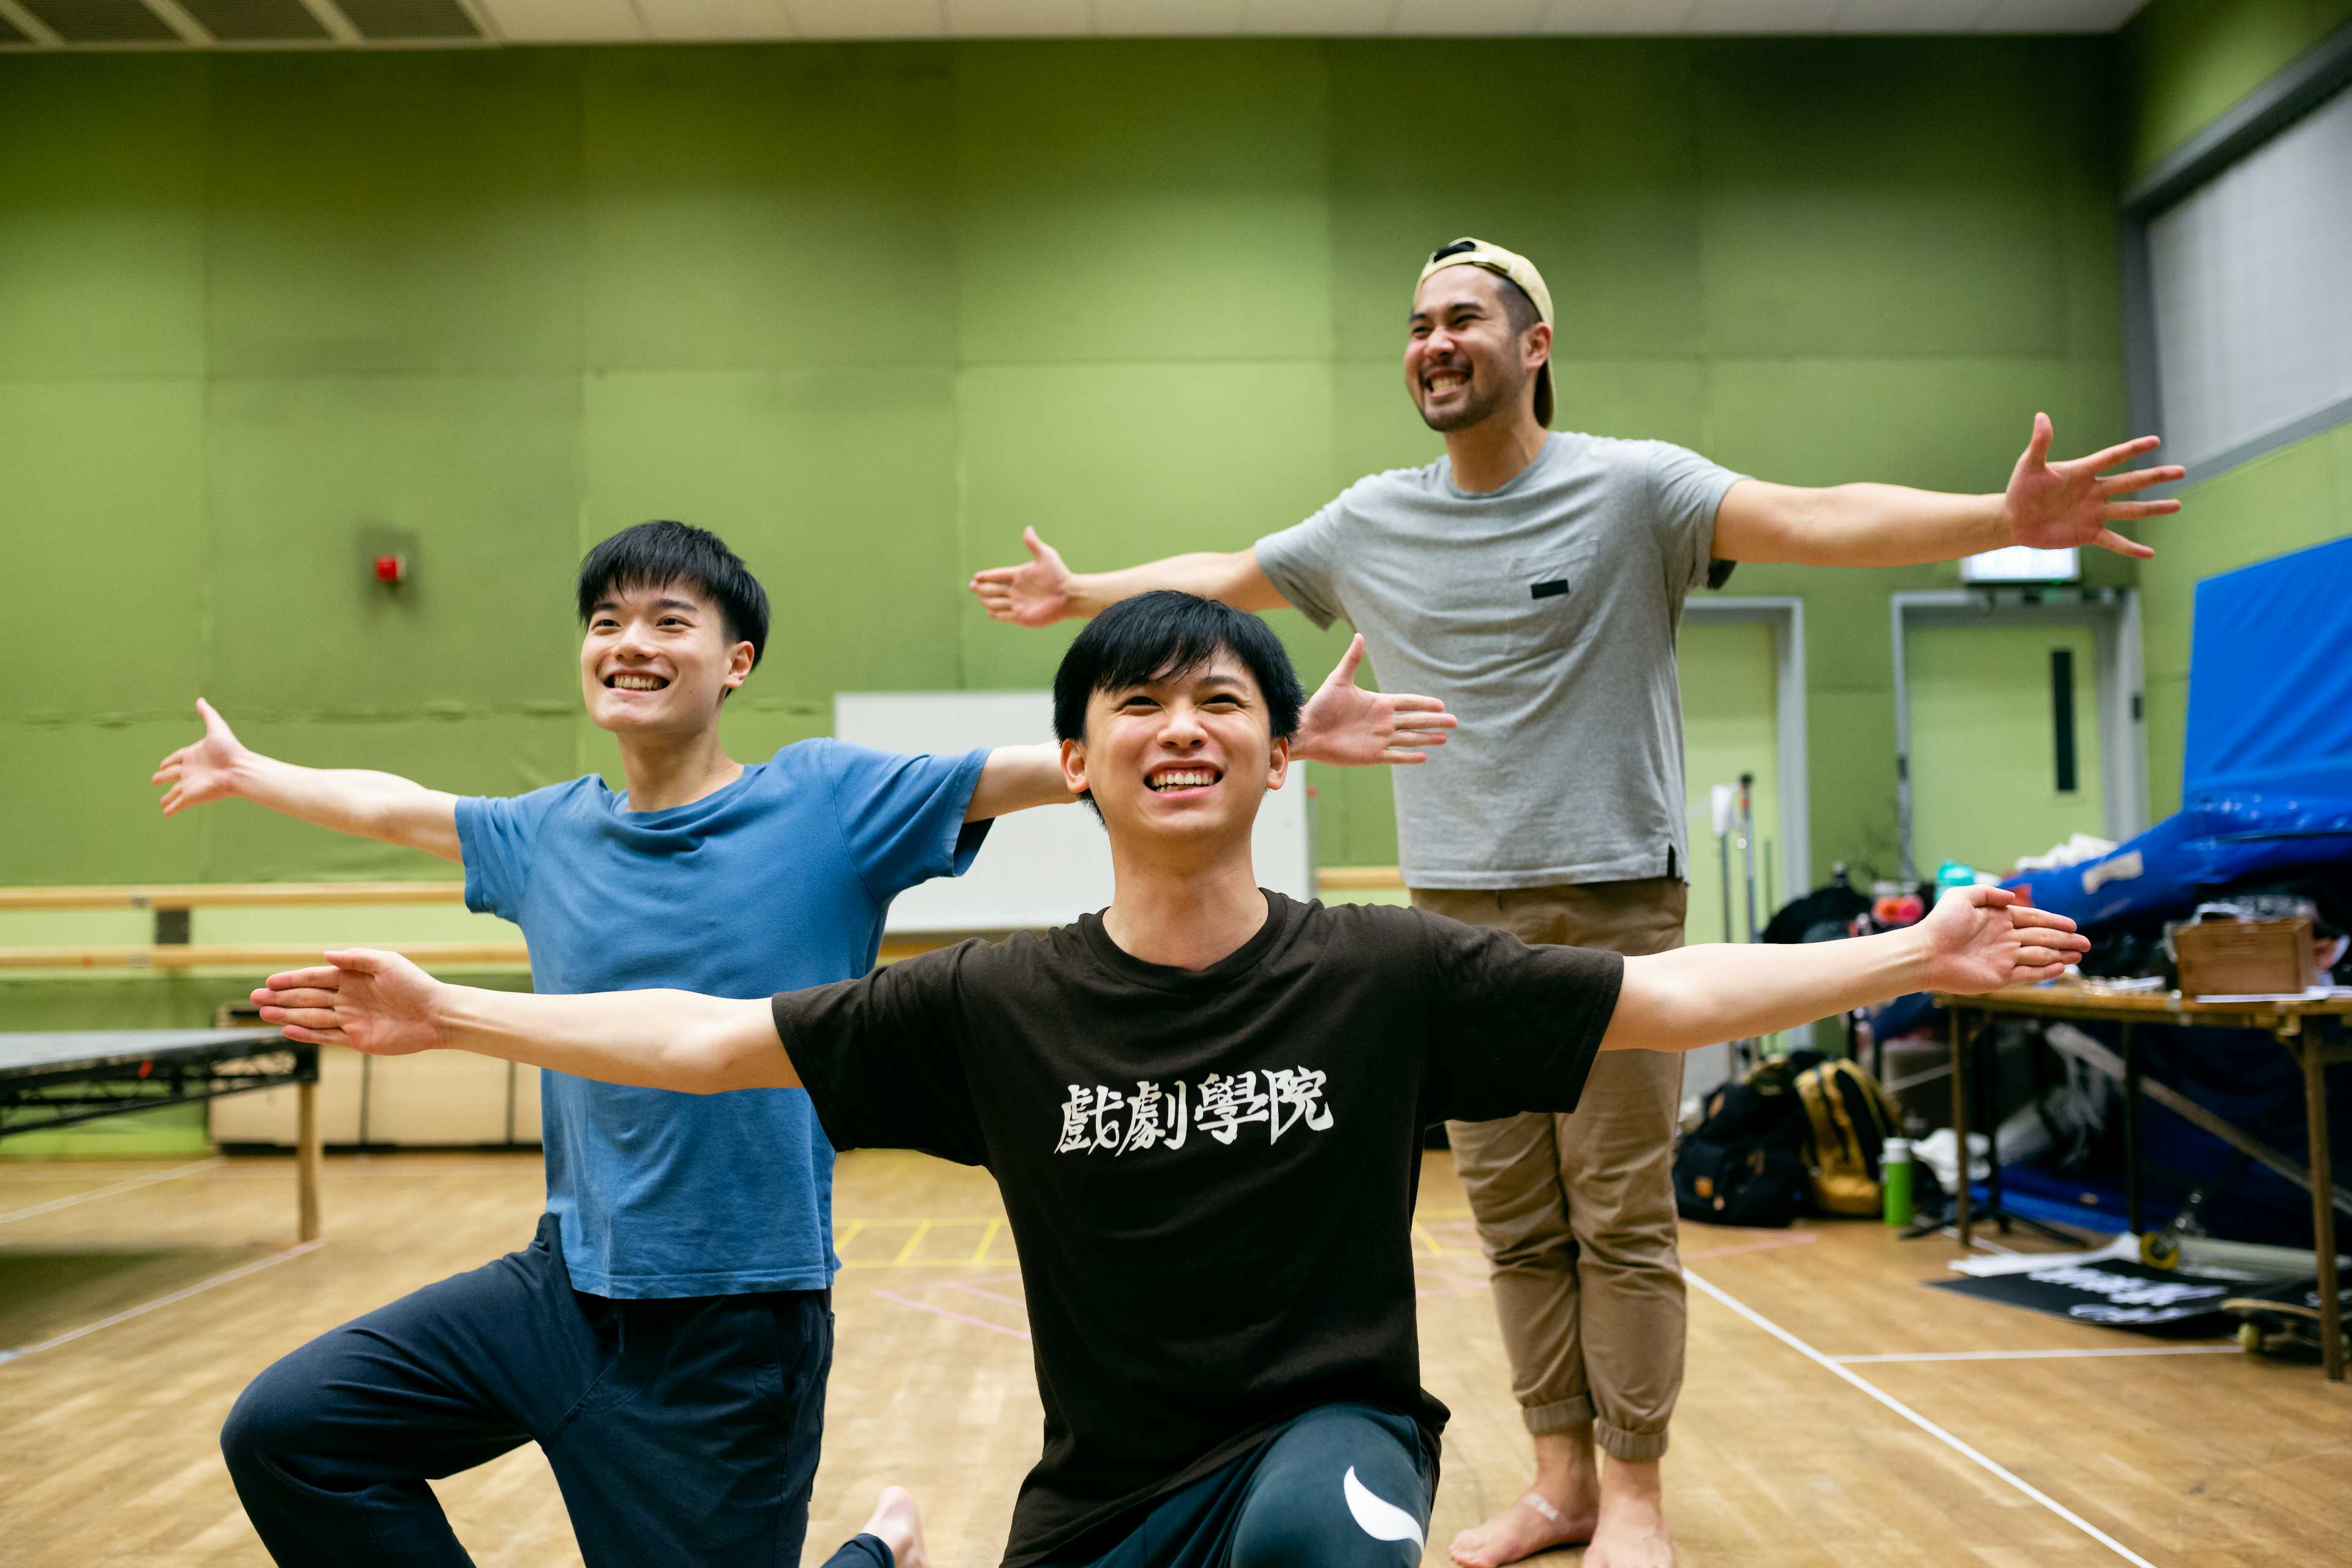  | Featuring: Chew Yu-yeung, Lo Man-chak, Mok Kok-pong | Tagged as: Songs of Innocence and Experience, Rehearsal | Photo: Ivor Houlker, Rooftop Productions |  (Rooftop Productions • Hong Kong Theatre Company)  | Rooftop Productions • Hong Kong Theatre Company